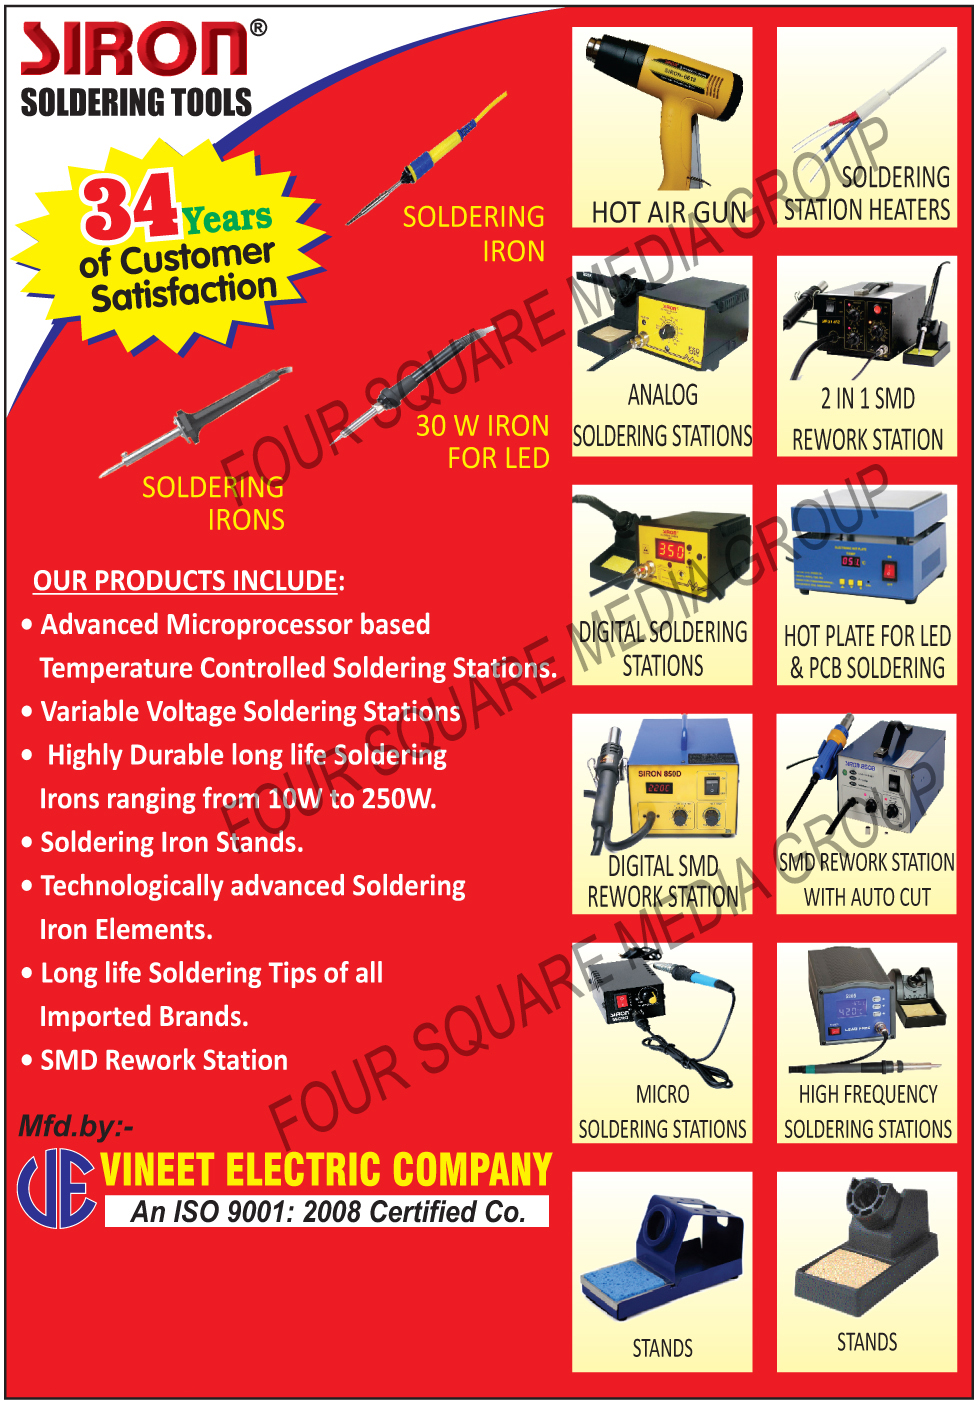 Hot Air Guns, Soldering Station Heaters, Analog Soldering Stations, Digital Soldering Stations, Digital SMD Rework Stations, Micro Soldering Stations, Soldering Iron Stands, Soldering Stations, SMD Rework Station, Hot Plate, Soldering Tools, Variable Voltage Soldering Stations, Temperature Controlled Soldering Stations, Soldering Iron Elements, Soldering Irons